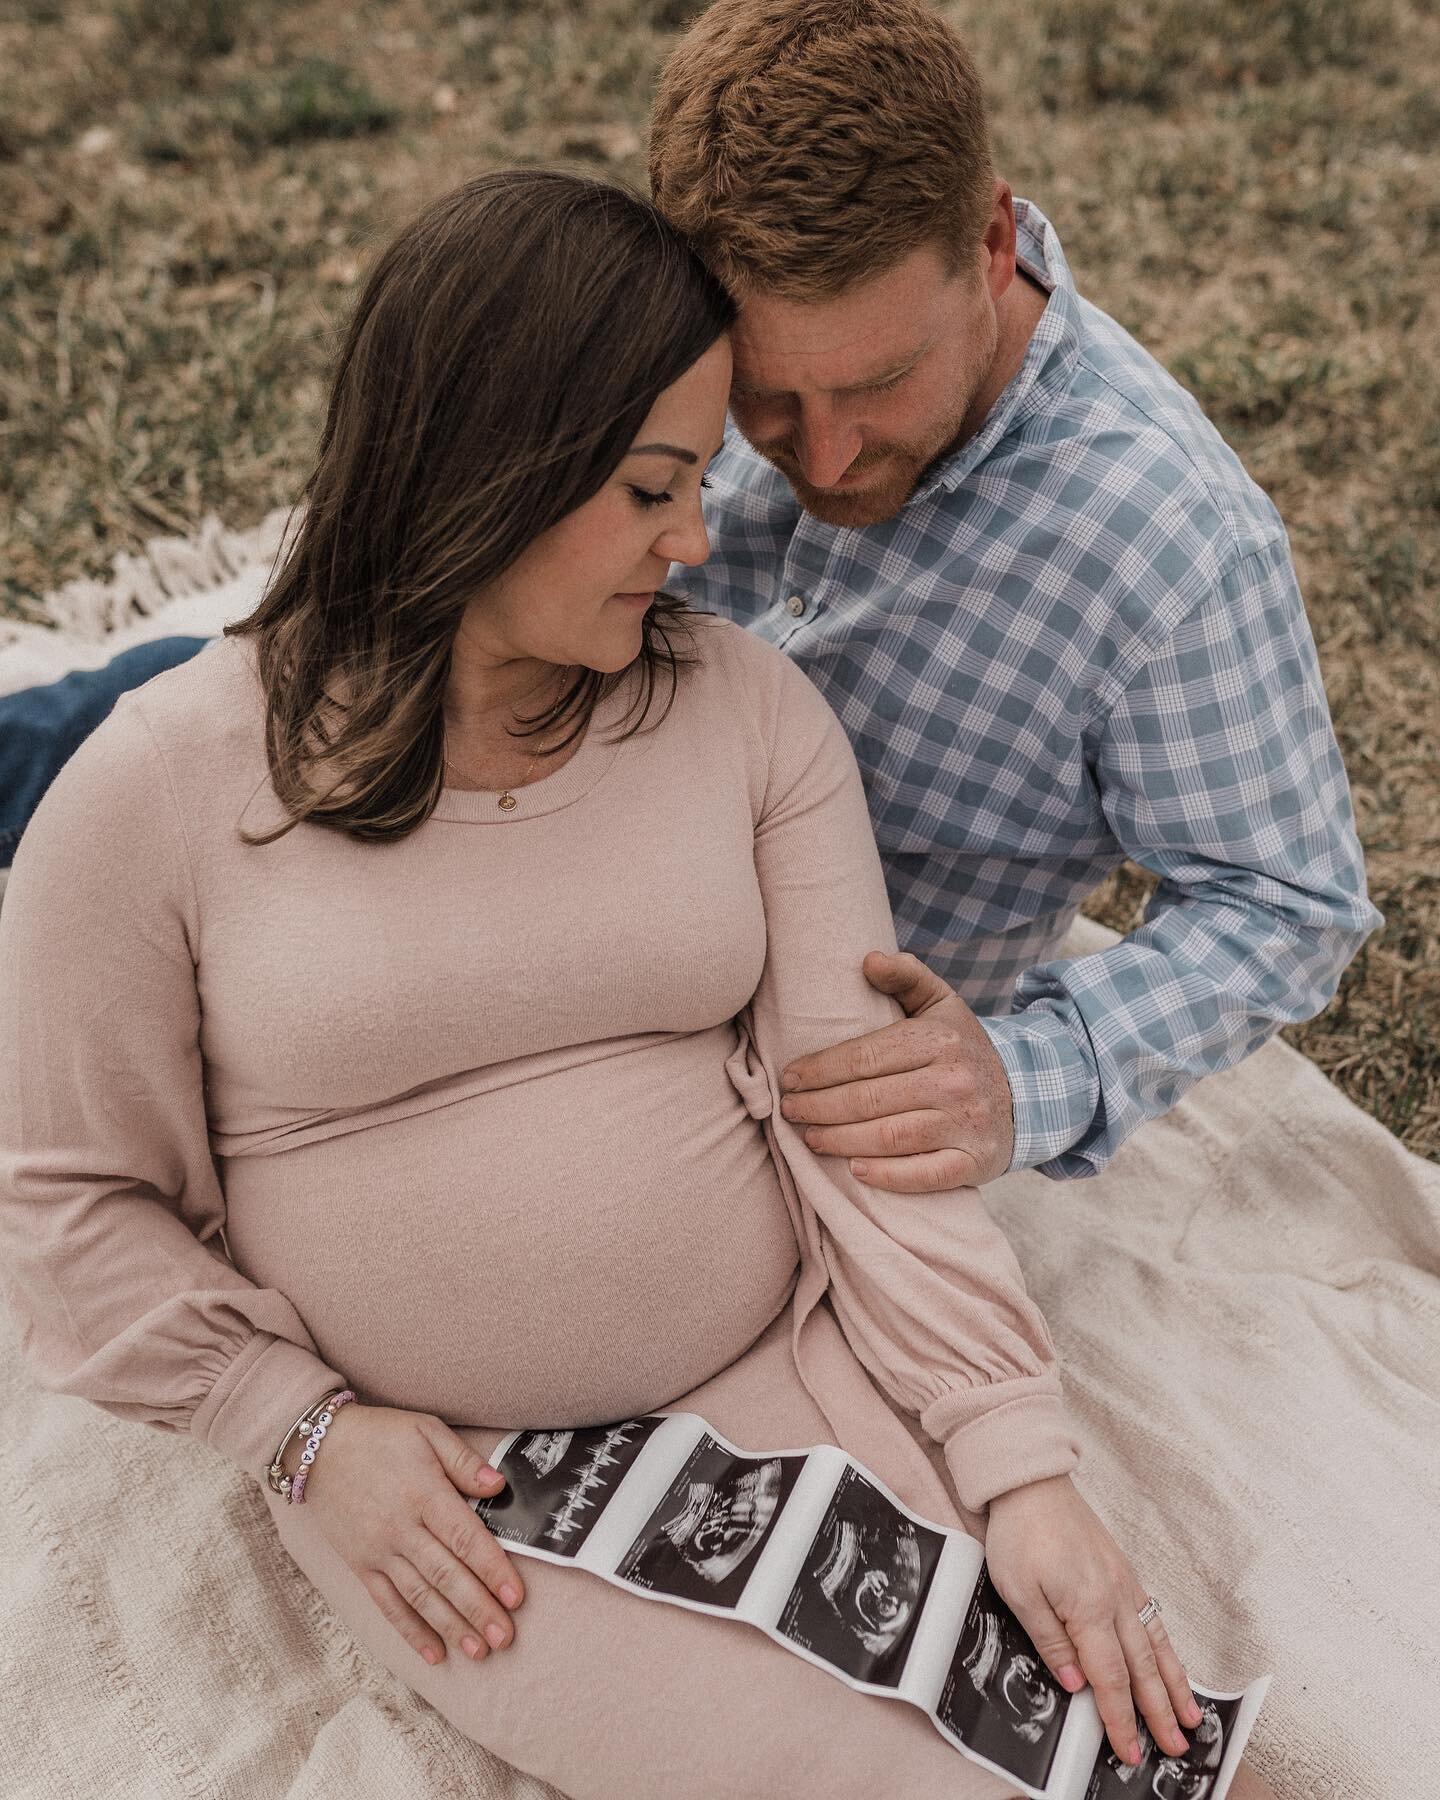 Could not have loved this maternity session any more!! Hannah and Justin are just weeks away from welcoming their baby girl earthside 🤍 Oh, and it just so happens that means I&rsquo;m gaining another niece! There is something so rewarding about phot